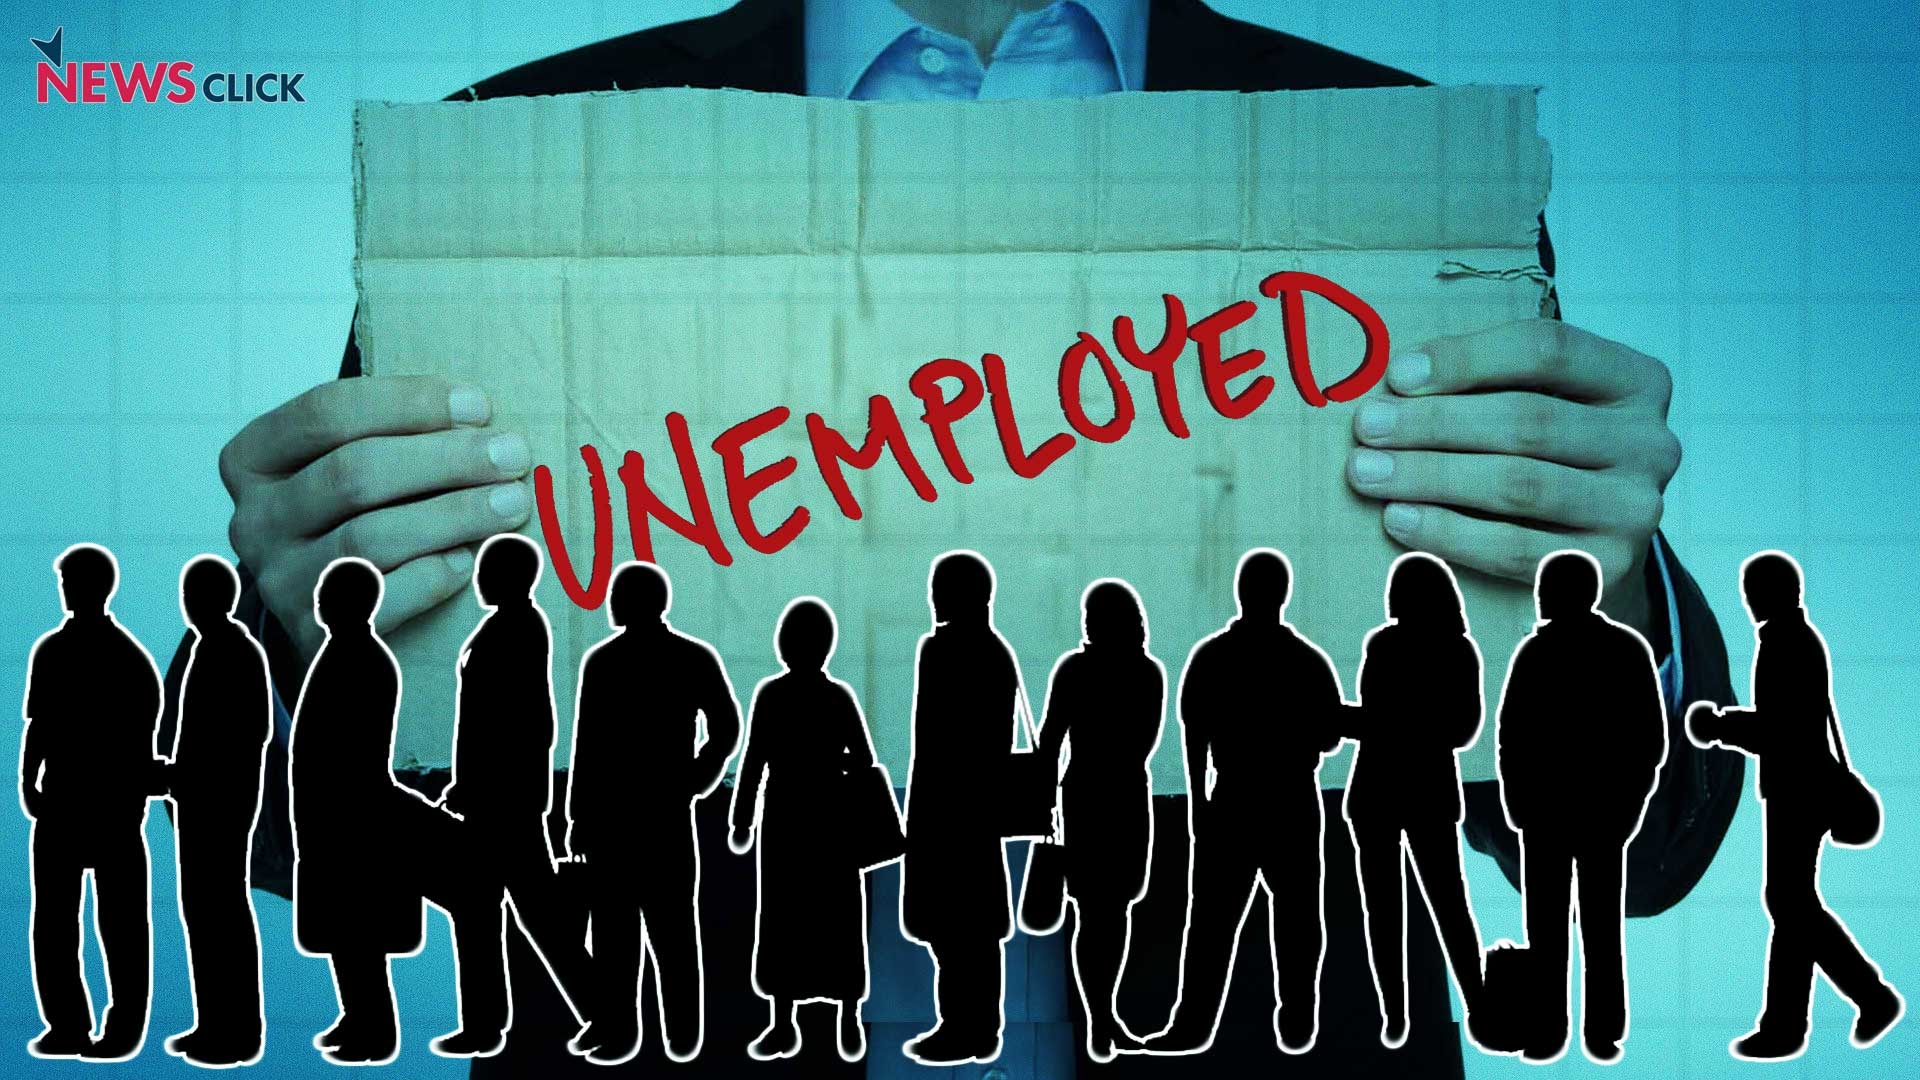 short case study on unemployment in india for project